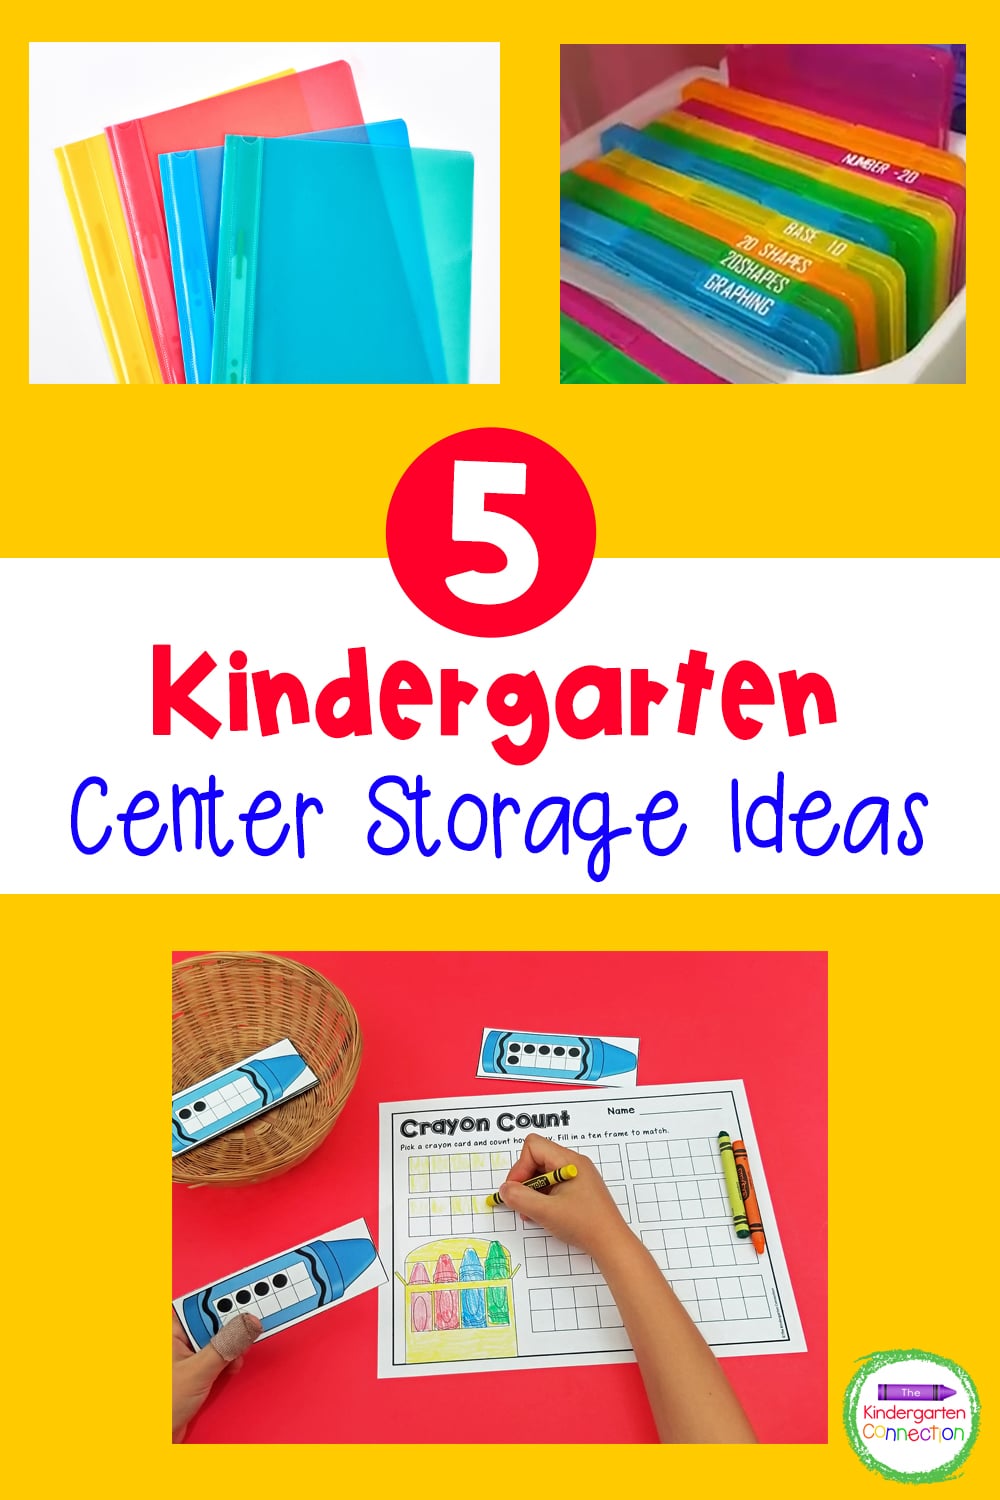 These Top 5 Storage Ideas for Centers in Kindergarten will provide just the inspiration you need for getting organized while stressing less!